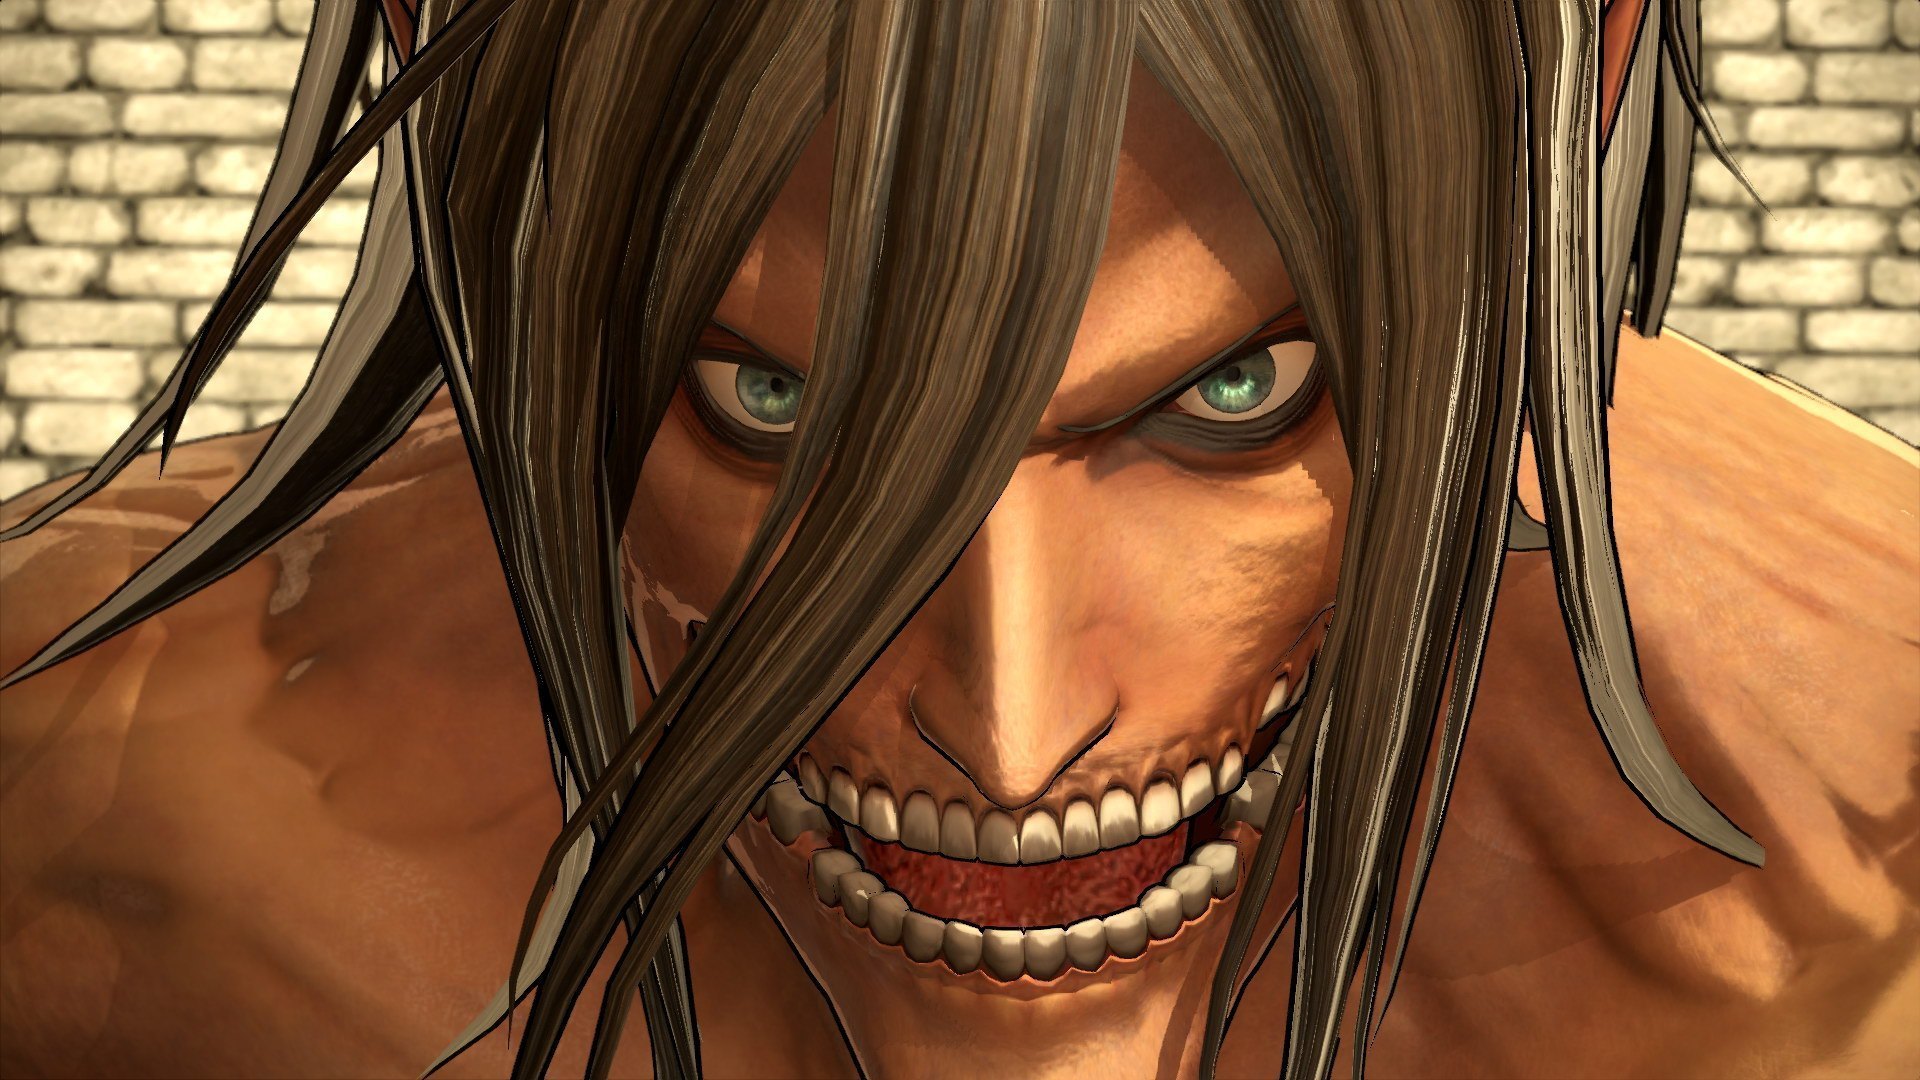 Attack on Titan: Wings of Freedom Review (PlayStation 4) - Official GBAtemp  Review | GBAtemp.net - The Independent Video Game Community